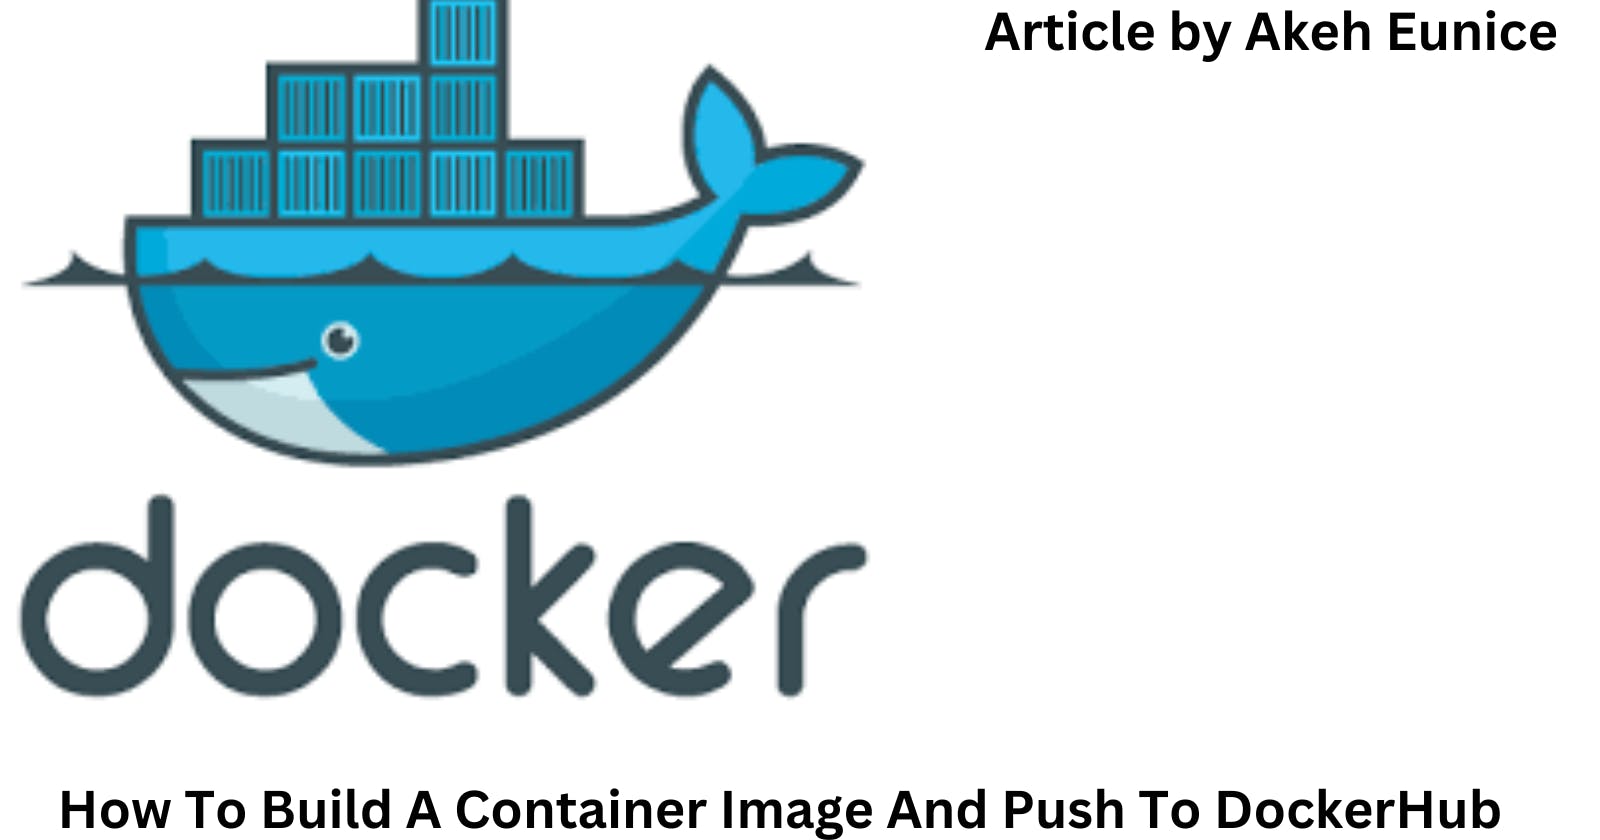 How To Build A Container Image And Push To DockerHub